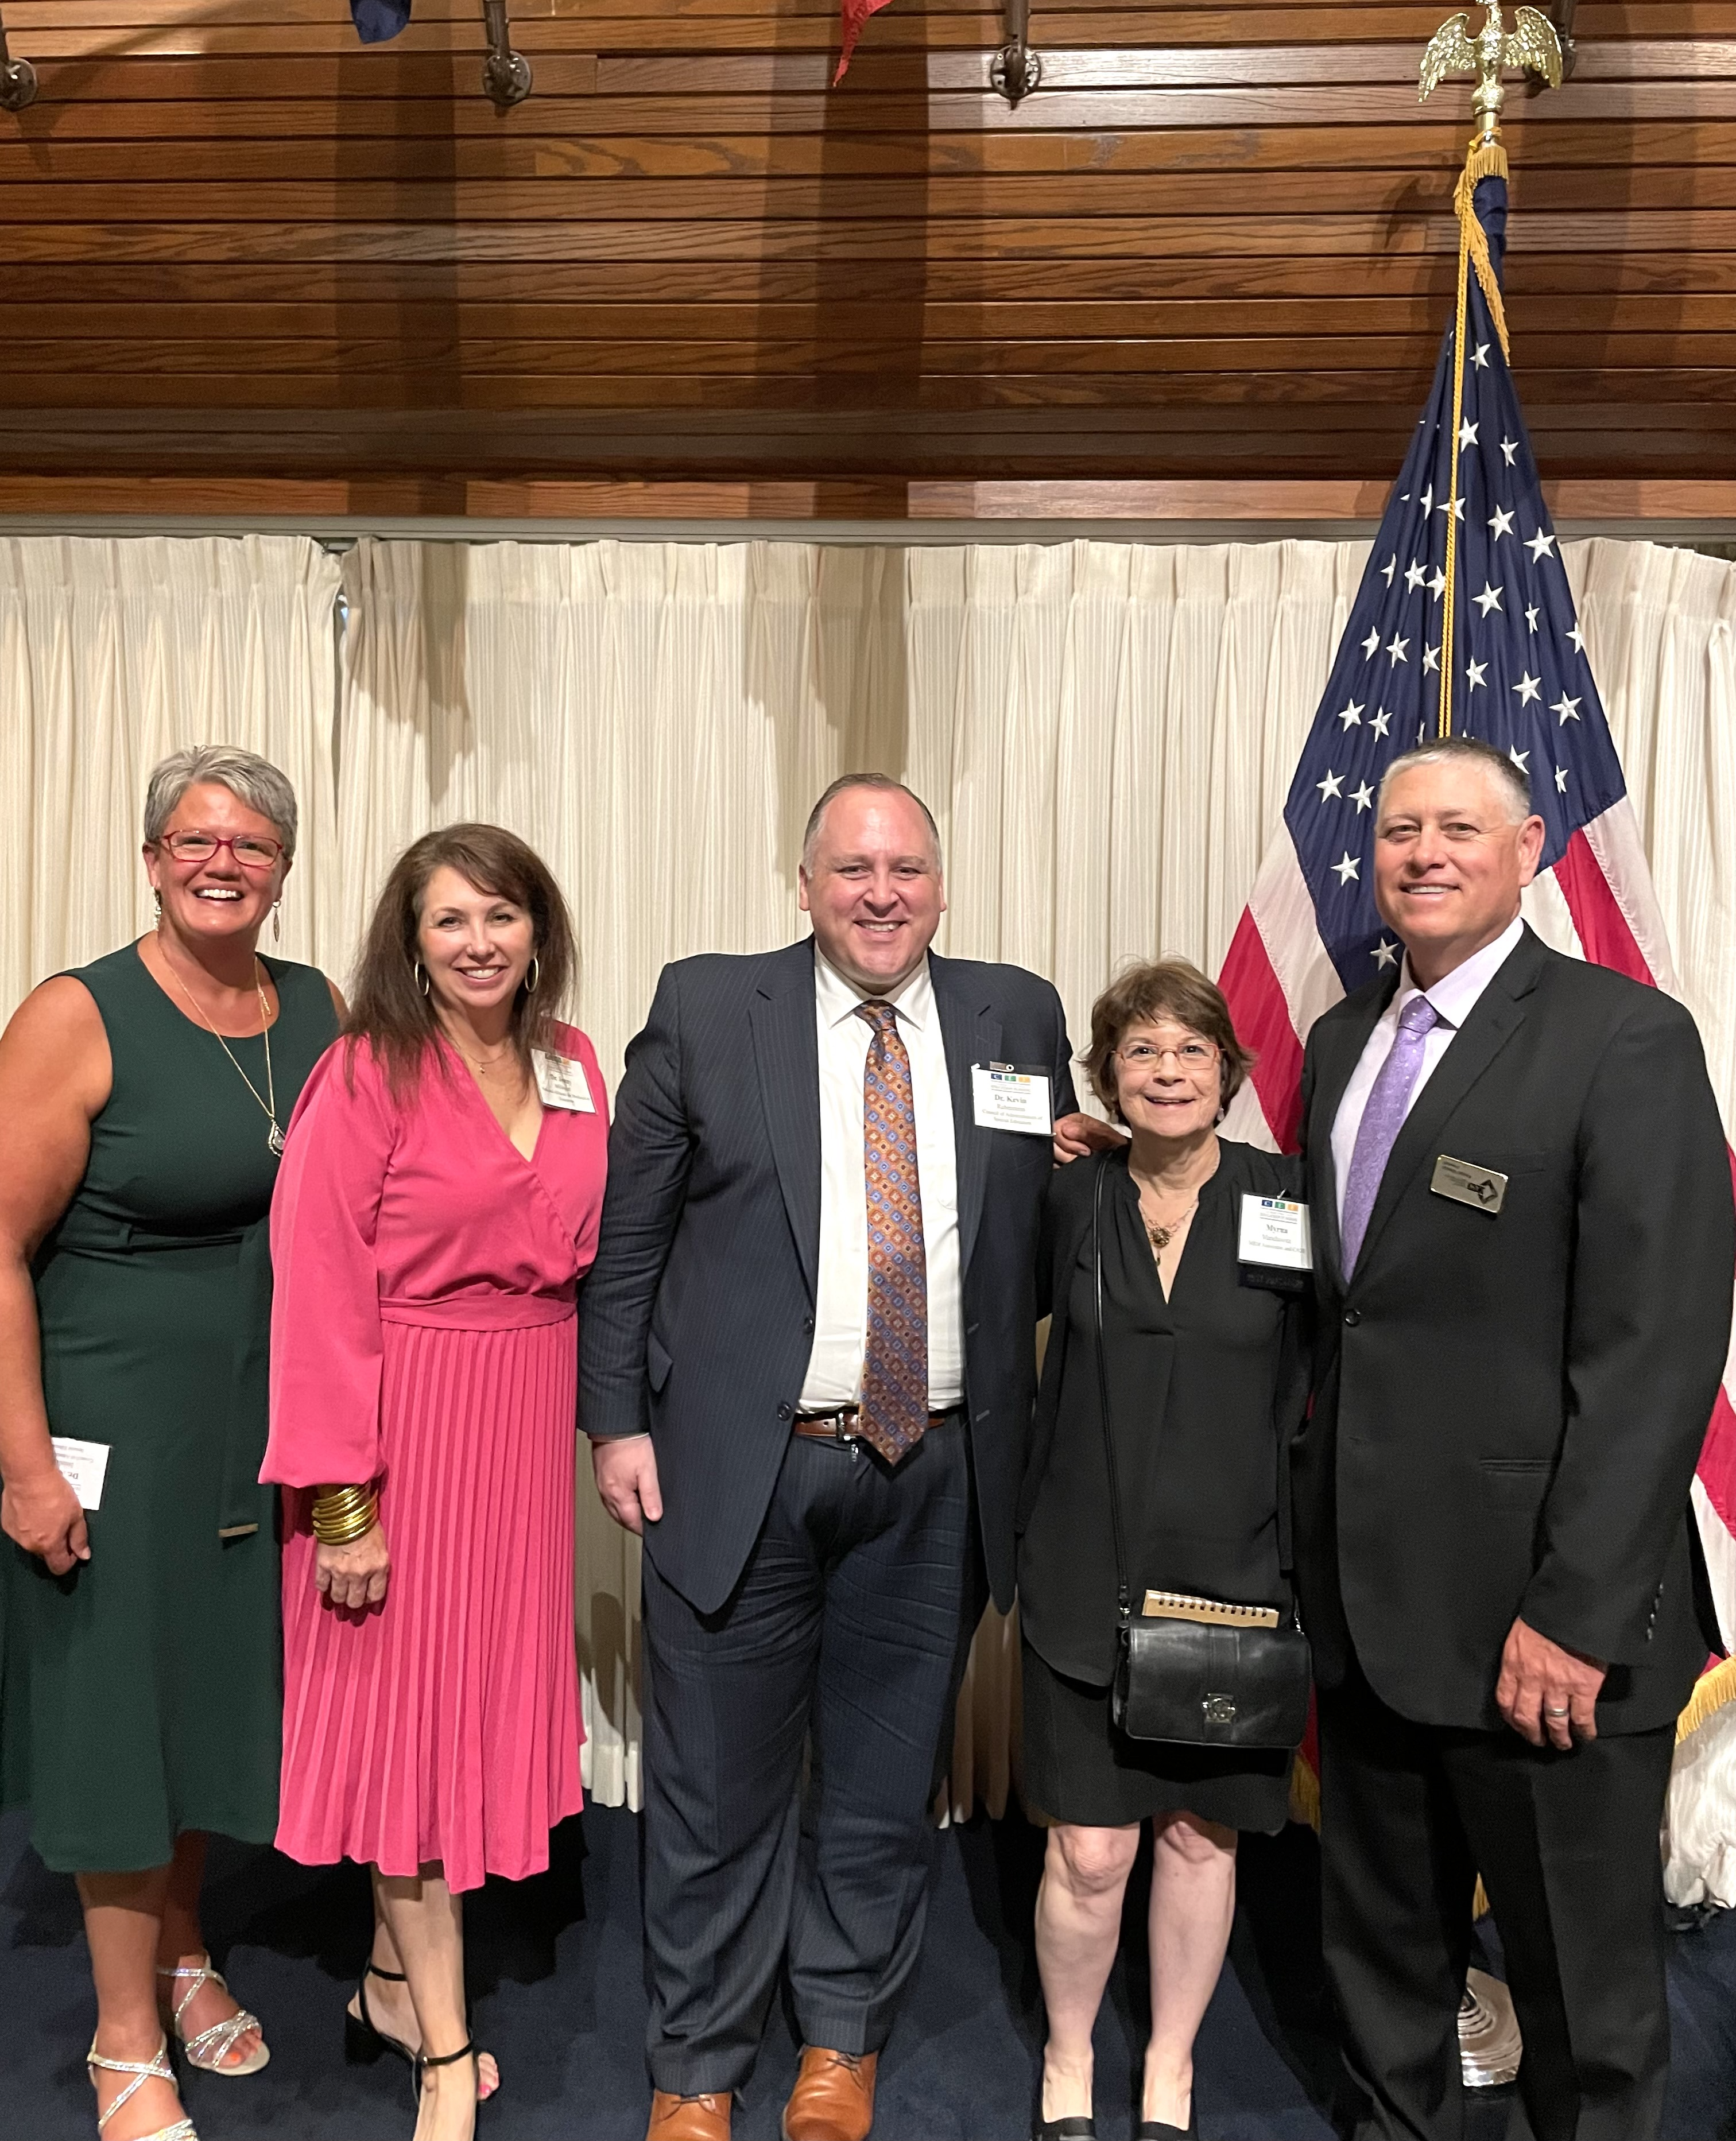 Dr. Angie Balsley, Policy and Legislative Chair, Jenny Millward, Executive Director, National Alliance for Medicaid in Education, Dr. Kevin Rubenstein, President-Elect, Myrna Mandlawitz, Policy and Legislative Consultant, and Kindel Mason, Present 